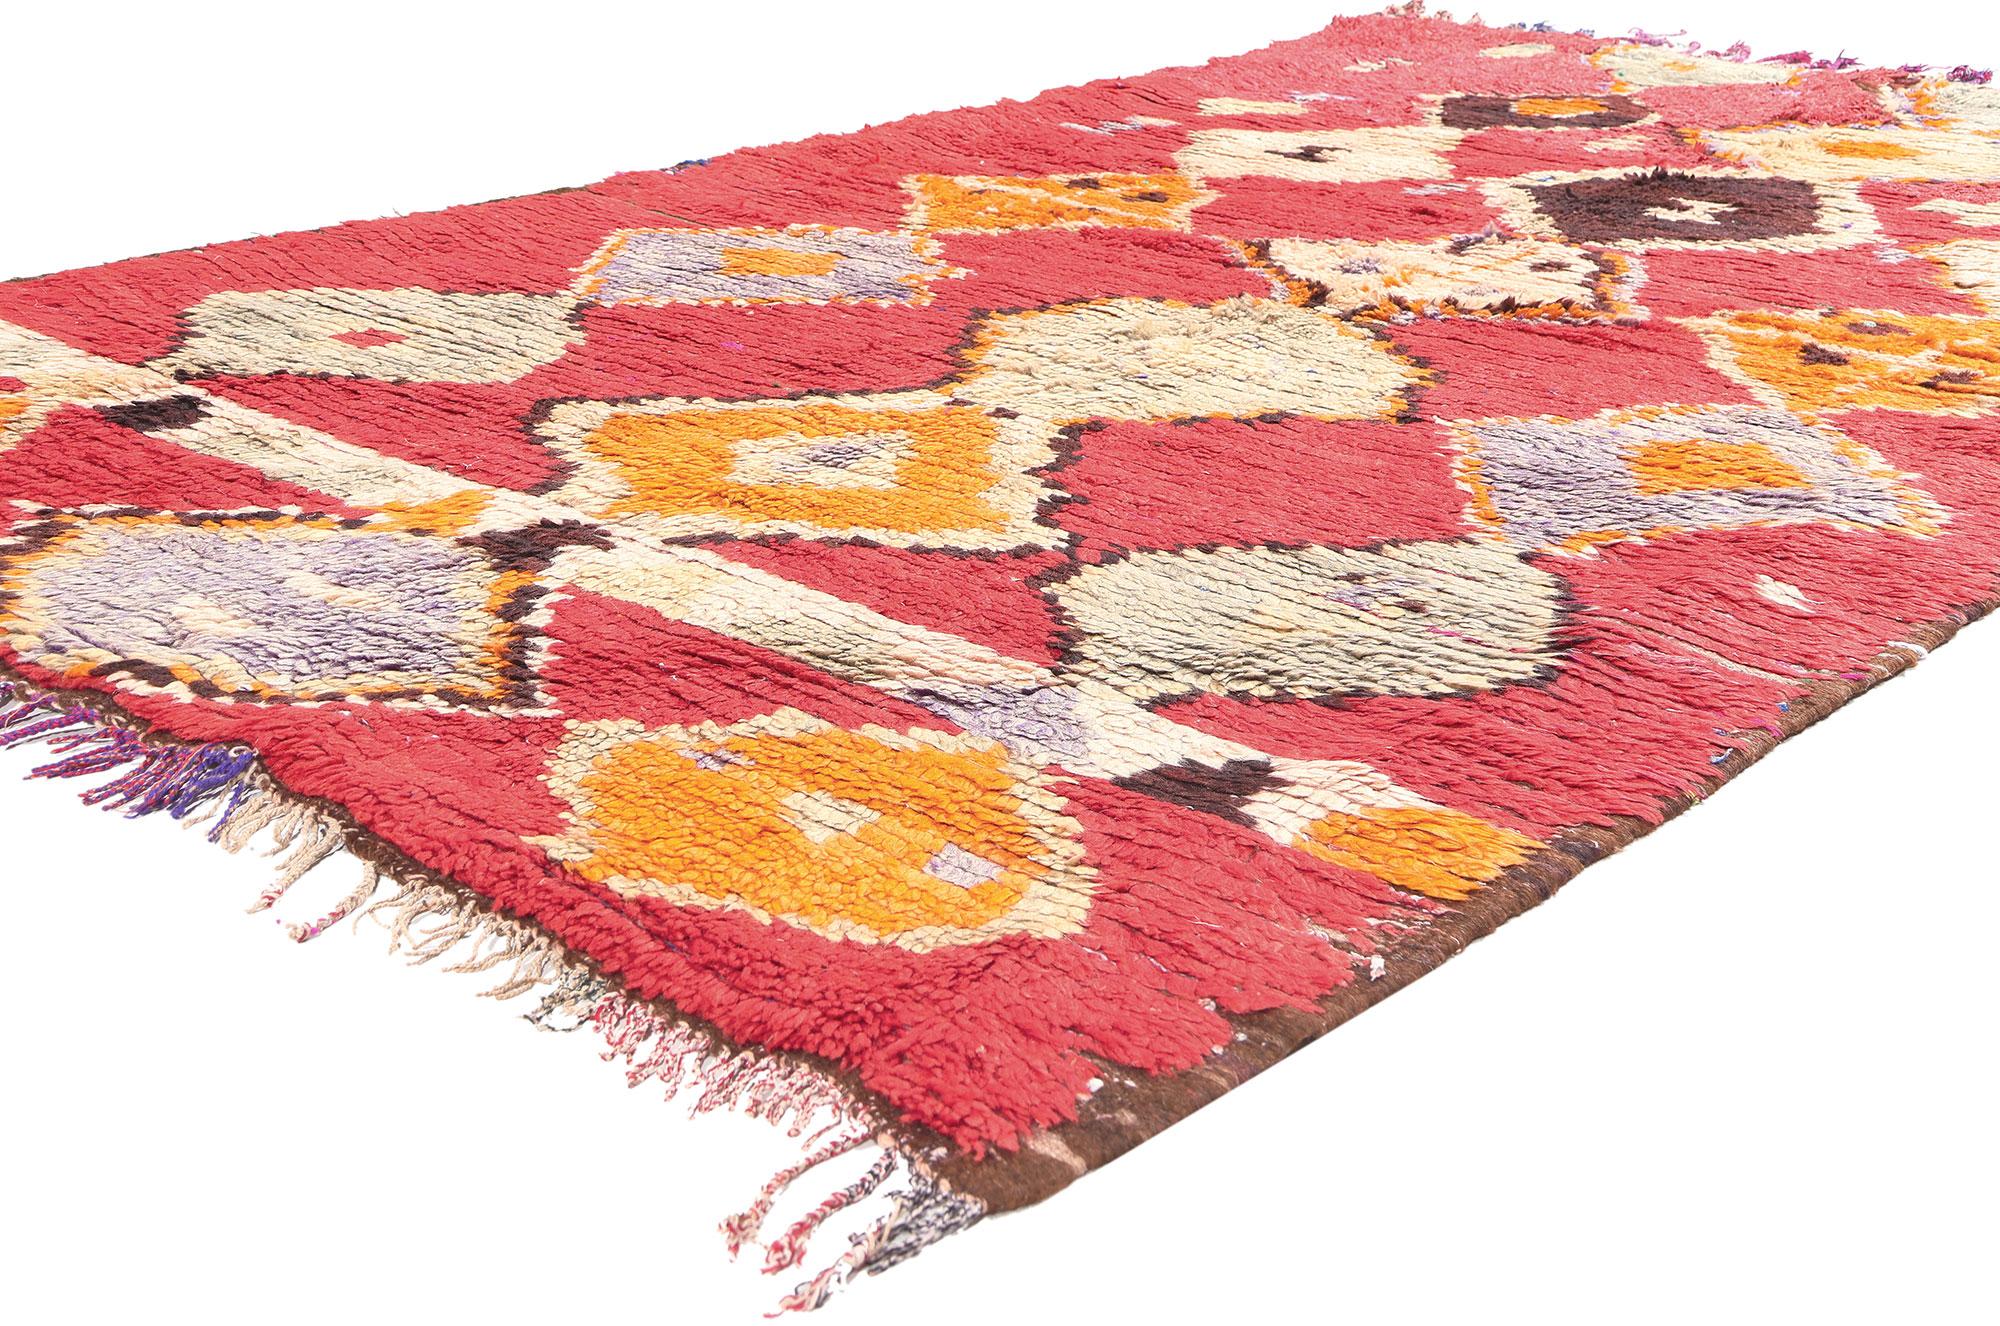 20386 Vintage Red Boujad Moroccan Rug, 04'09 x 08'03. Celebrate the vibrant spirit of Boujad rugs, originating from the lively city of Boujad in the Khouribga region, renowned for their eccentric and artistic designs. Enter the enchanting world of